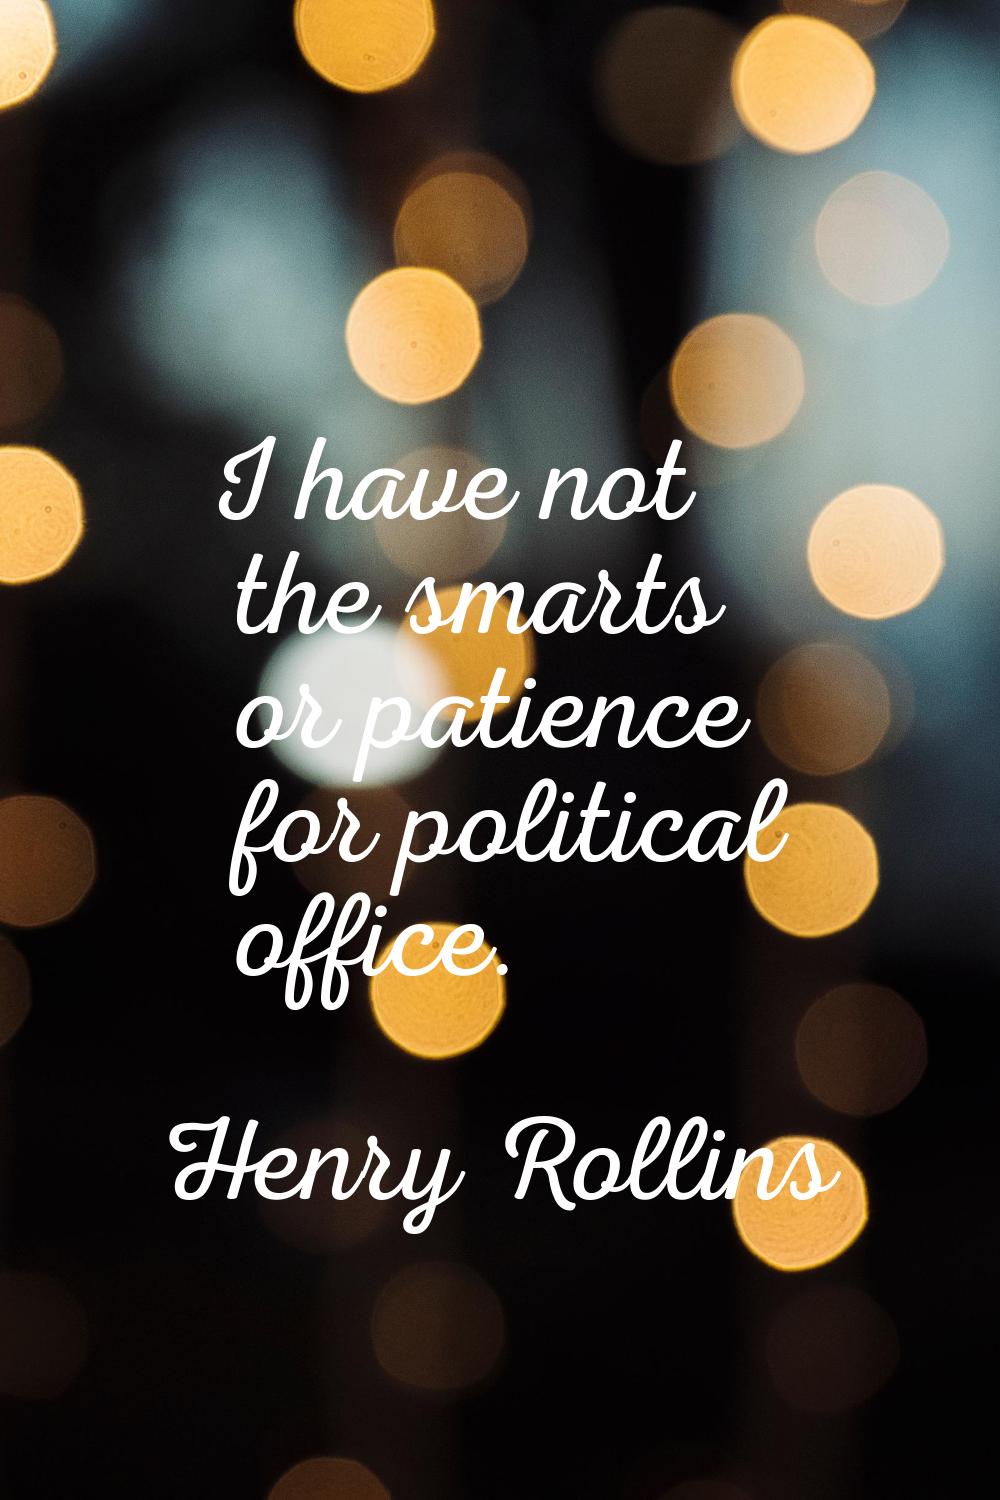 I have not the smarts or patience for political office.